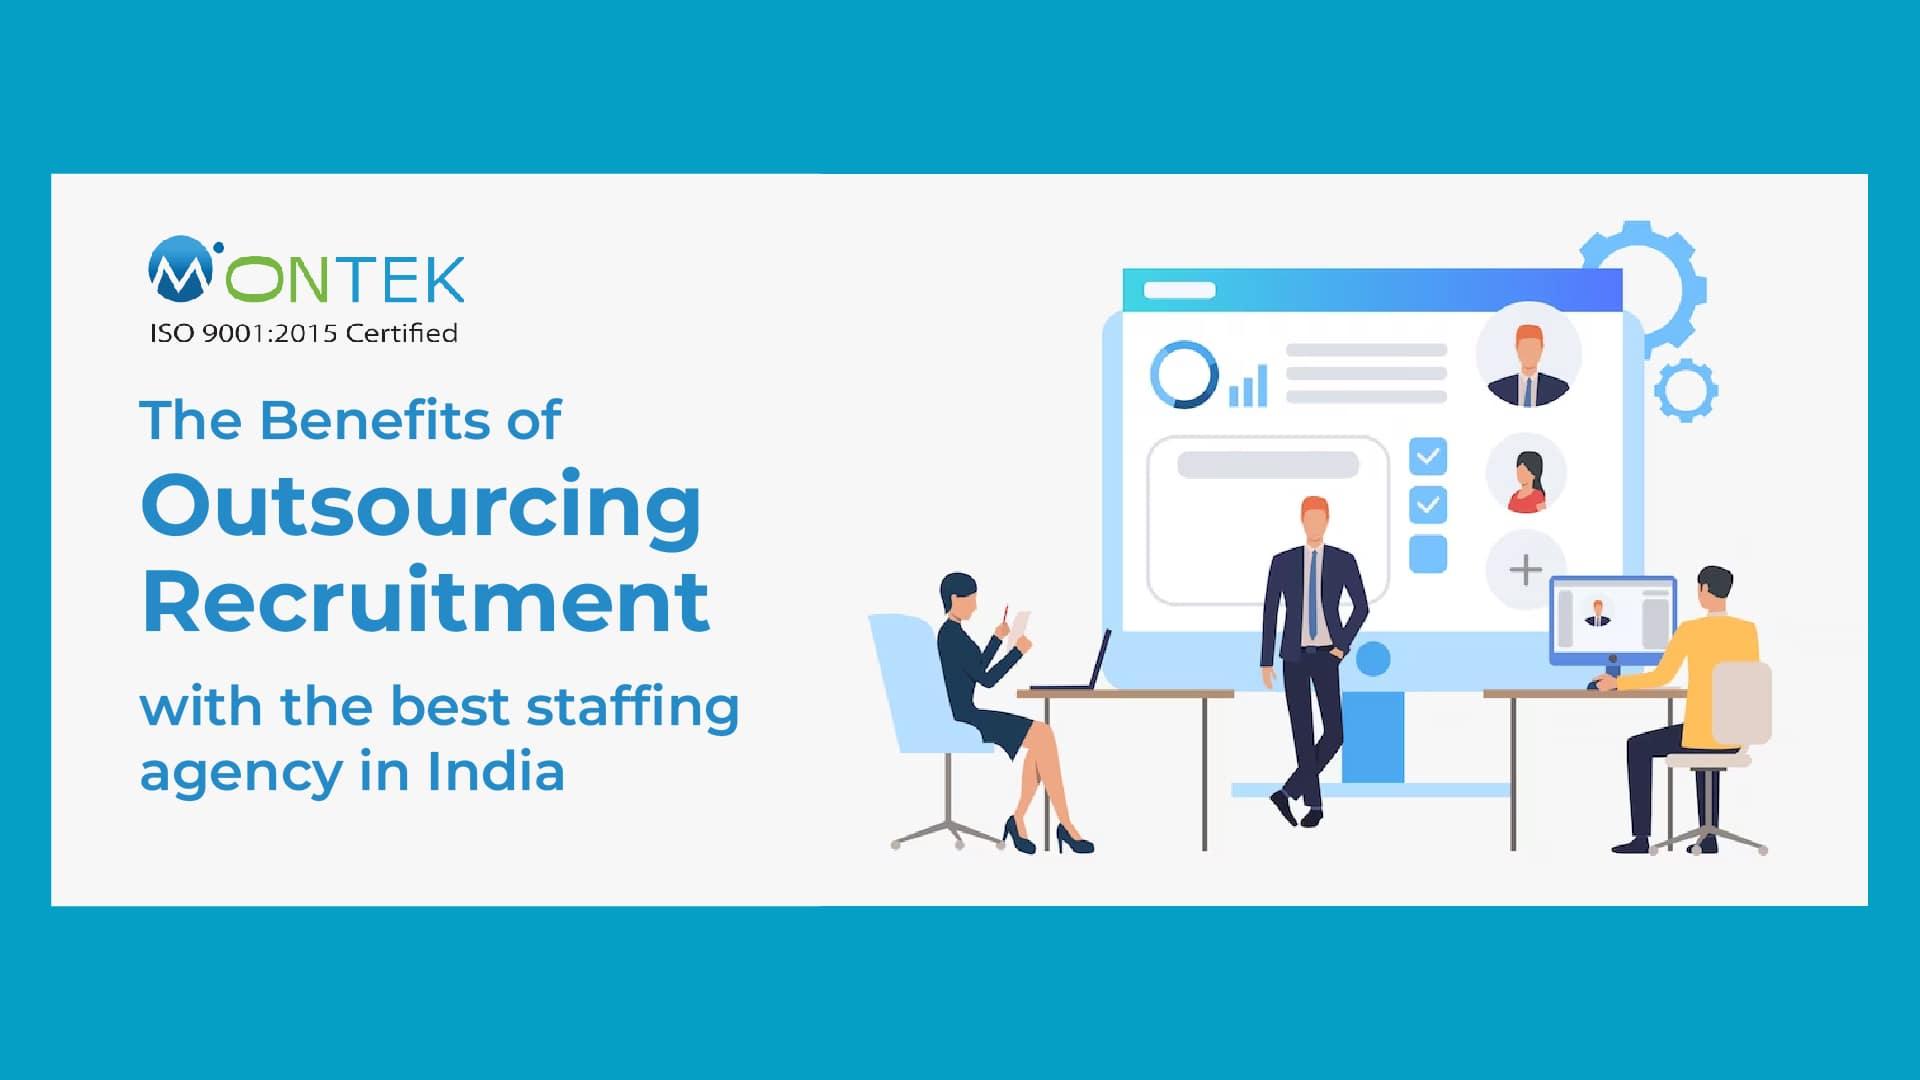 The Benefits of Outsourcing Recruitment with the best staffing agency in India 